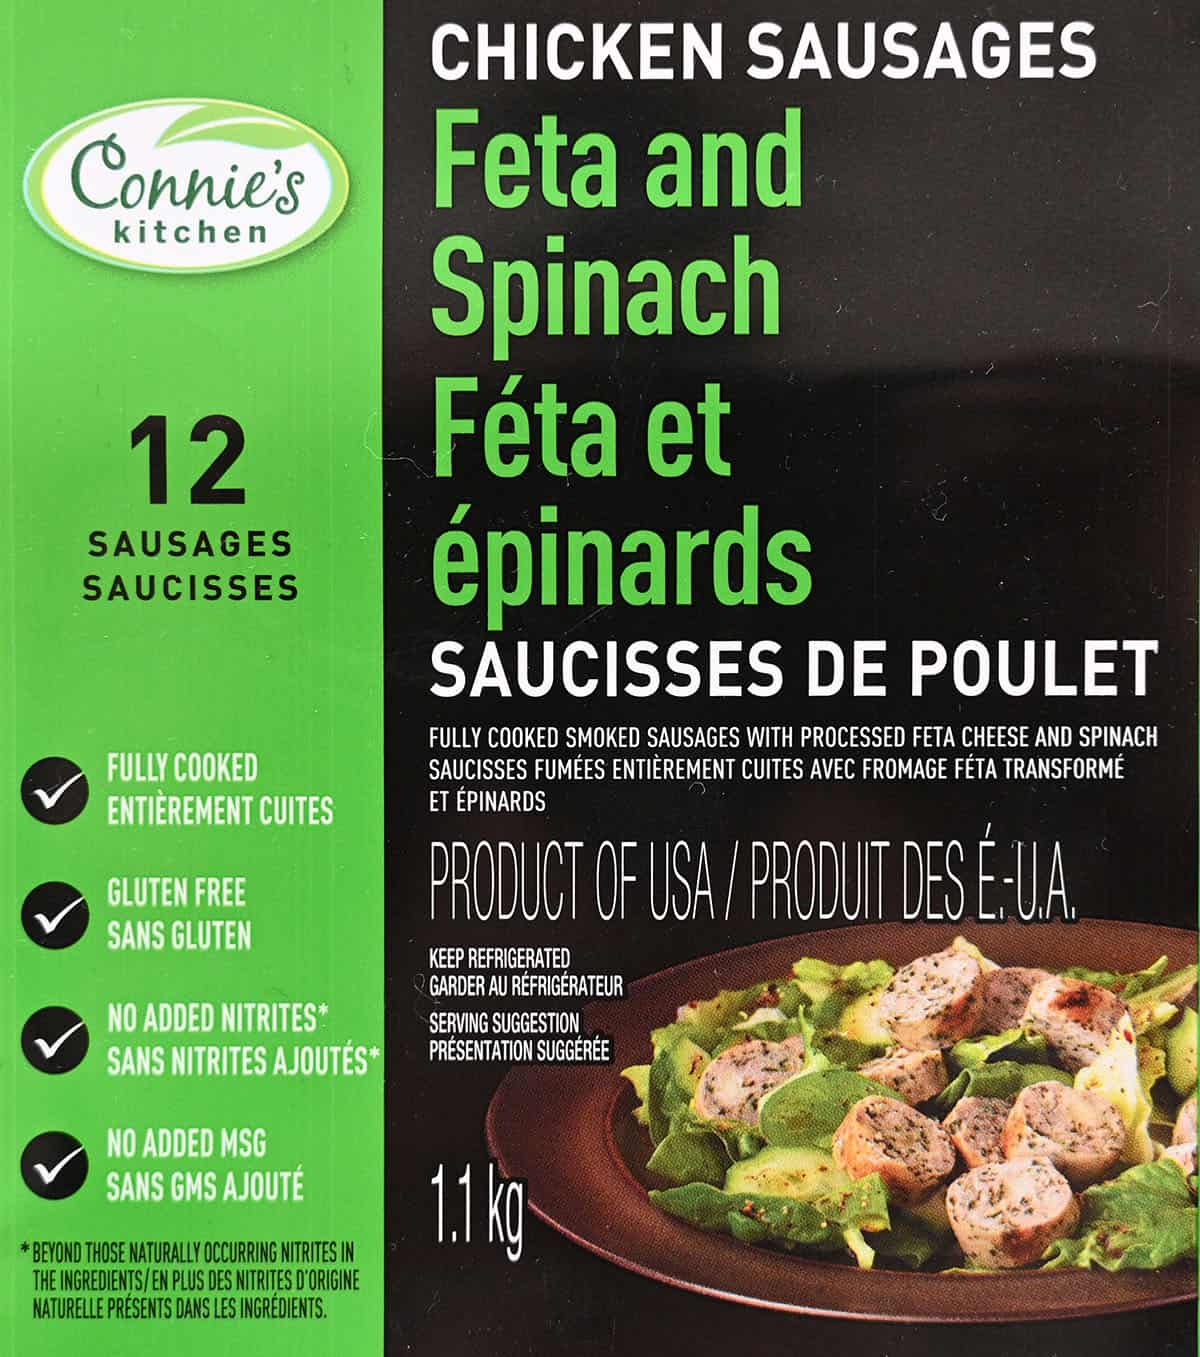 Closeup image of the front label on the sausages stating they're gluten-free with no added MSG or nitrites.